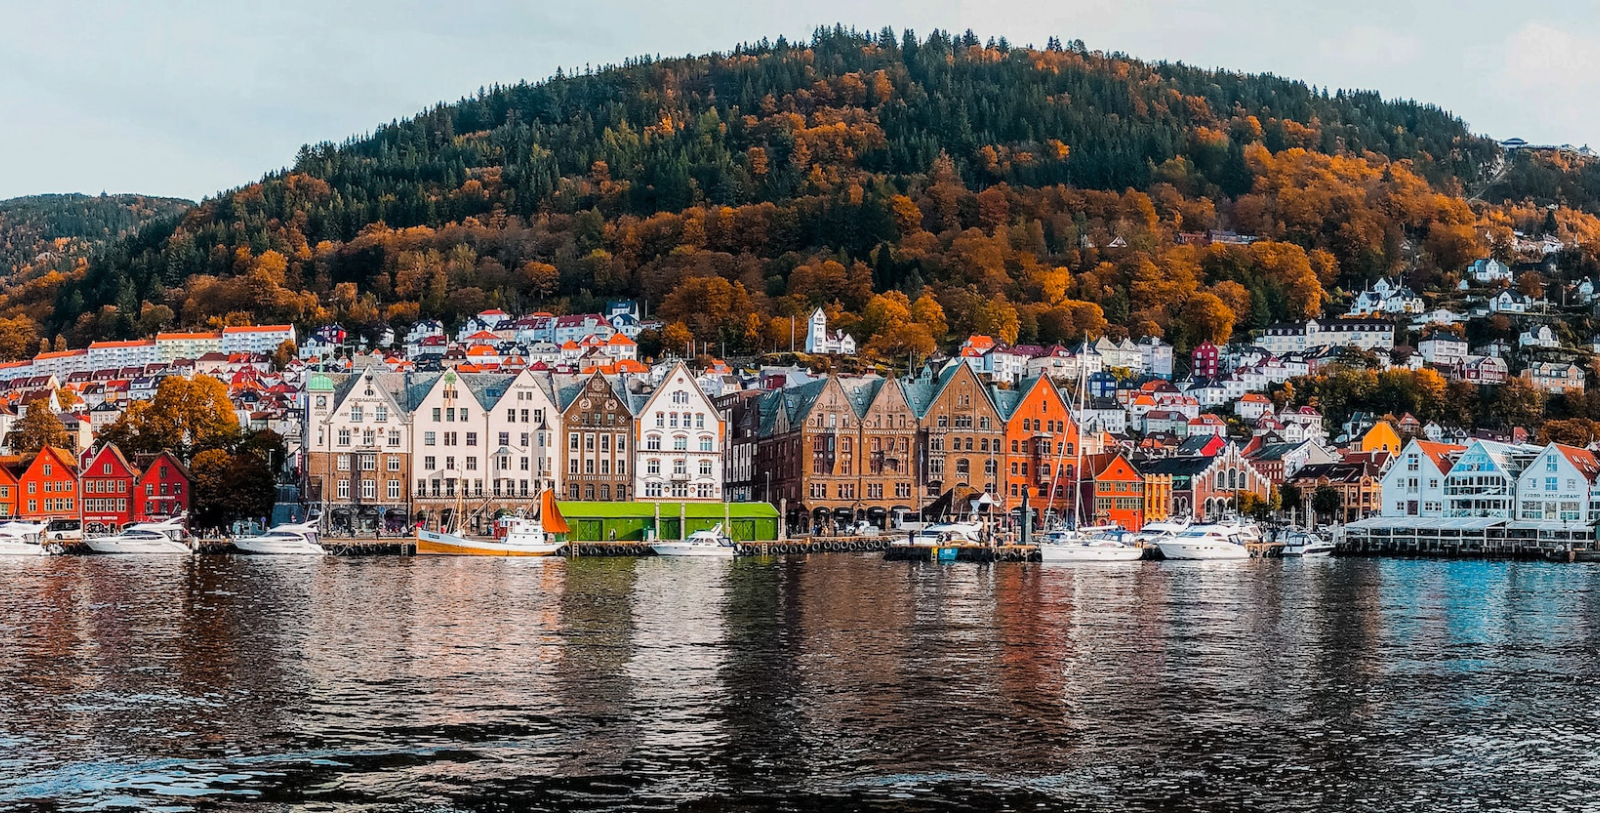 Delve into the natural beauty and cultural heritage of picturesque Bergen, a bucolic coastal community known as “The City of Seven Mountains” and the “Gateway to Norway’s Fjords.”